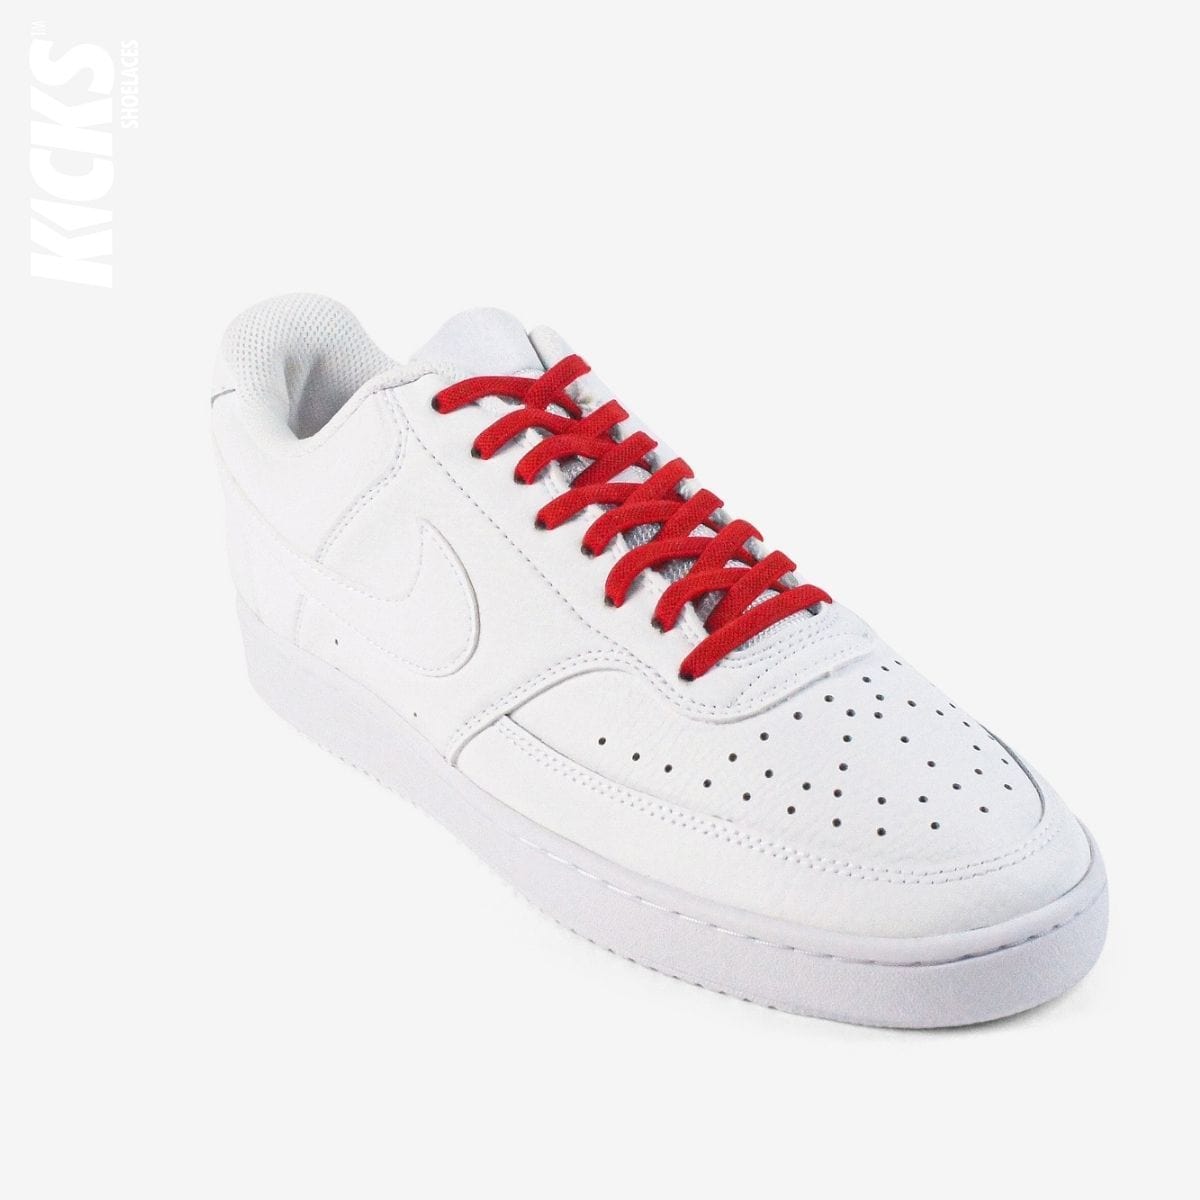 no-tie-shoelaces-with-red-laces-on-nike-white-sneakers-by-kicks-shoelaces